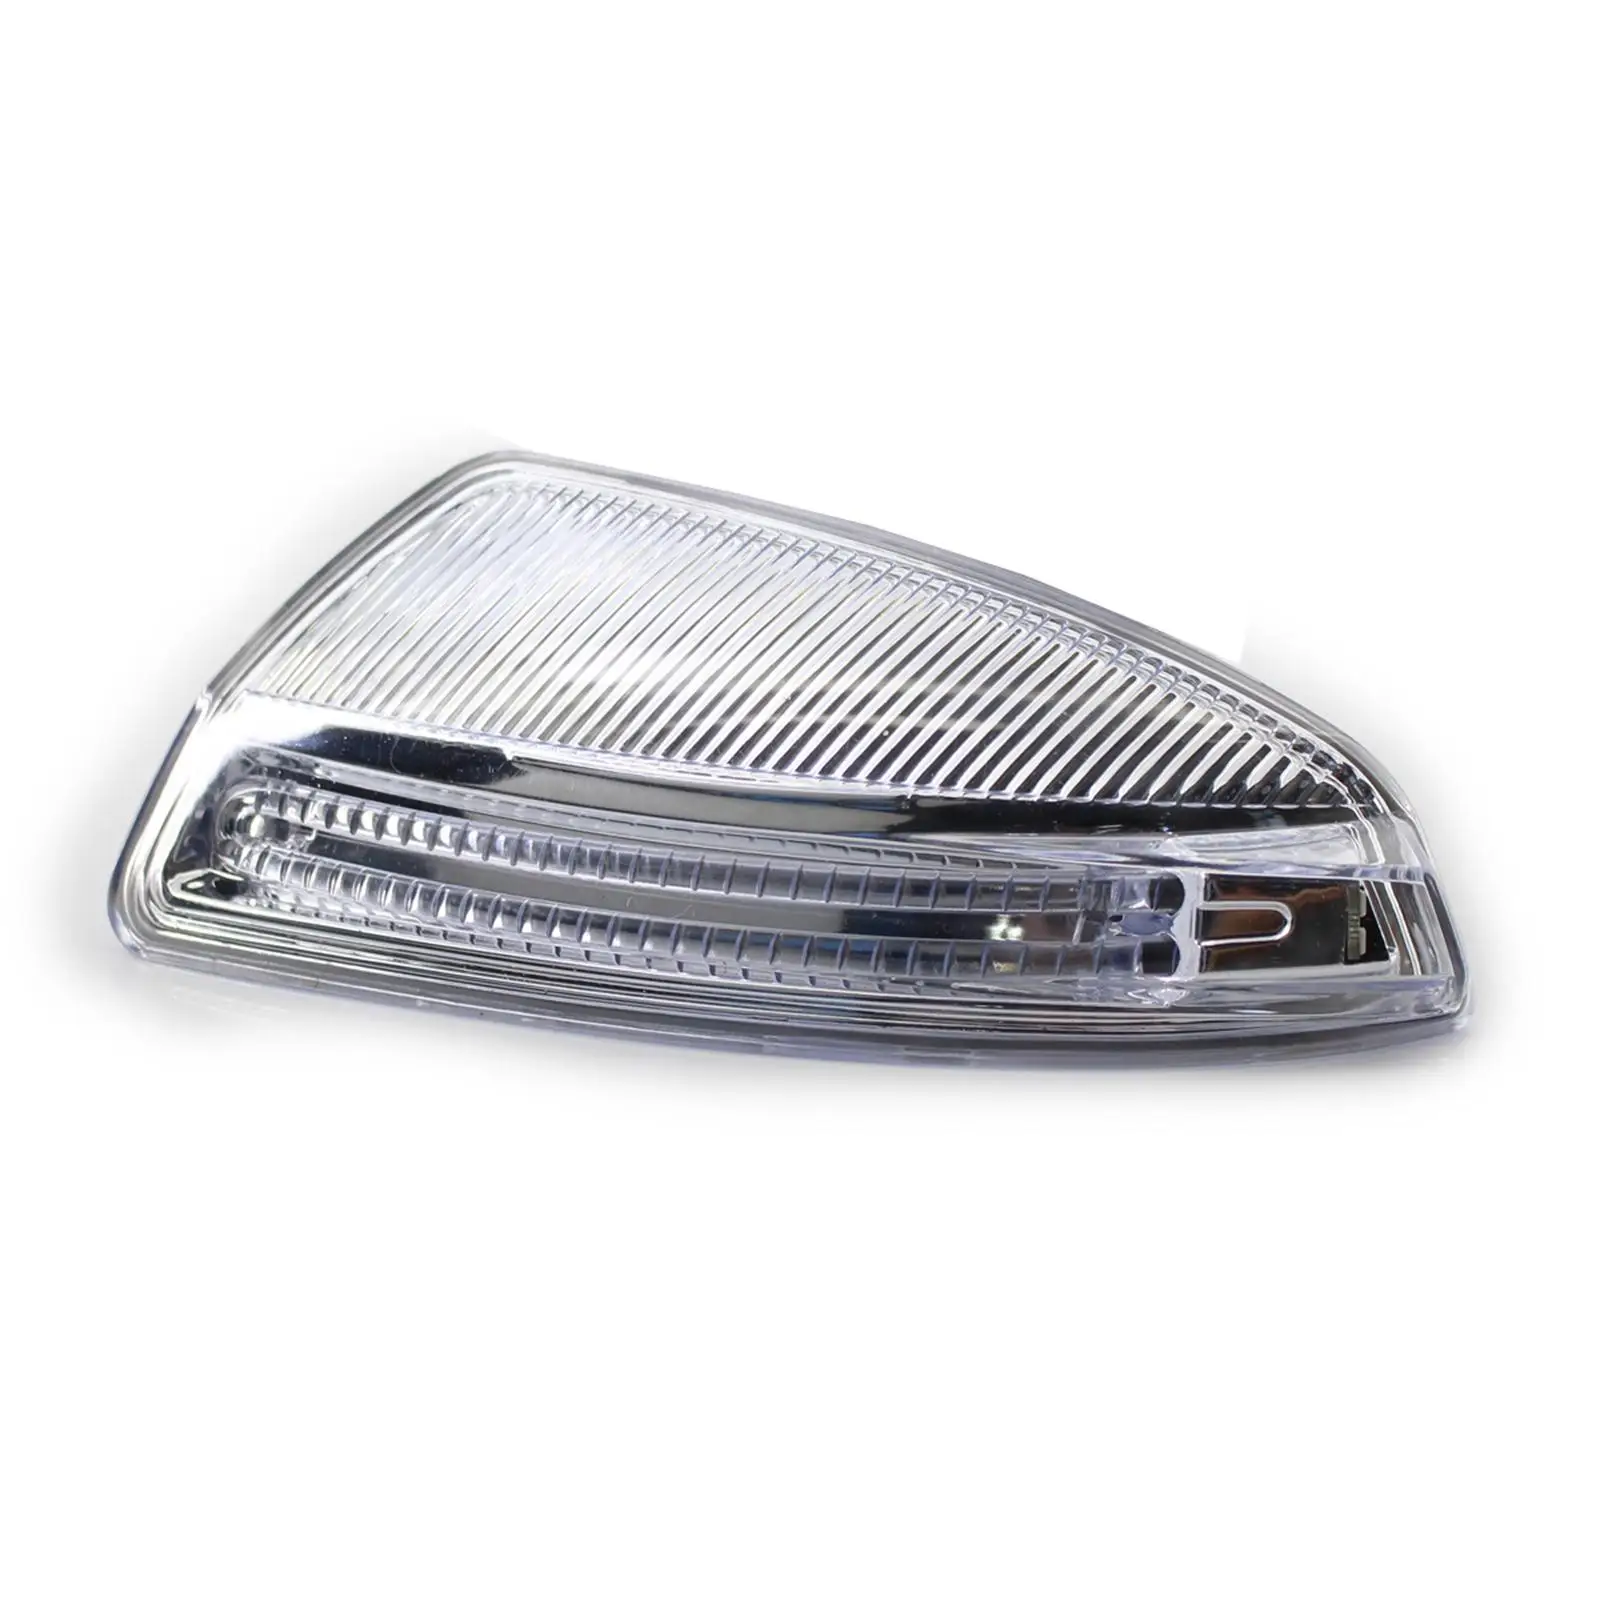 Turn Signal Rearview Mirror Light for Mercedes Benz W204 Viano W639 S204 2008-2014